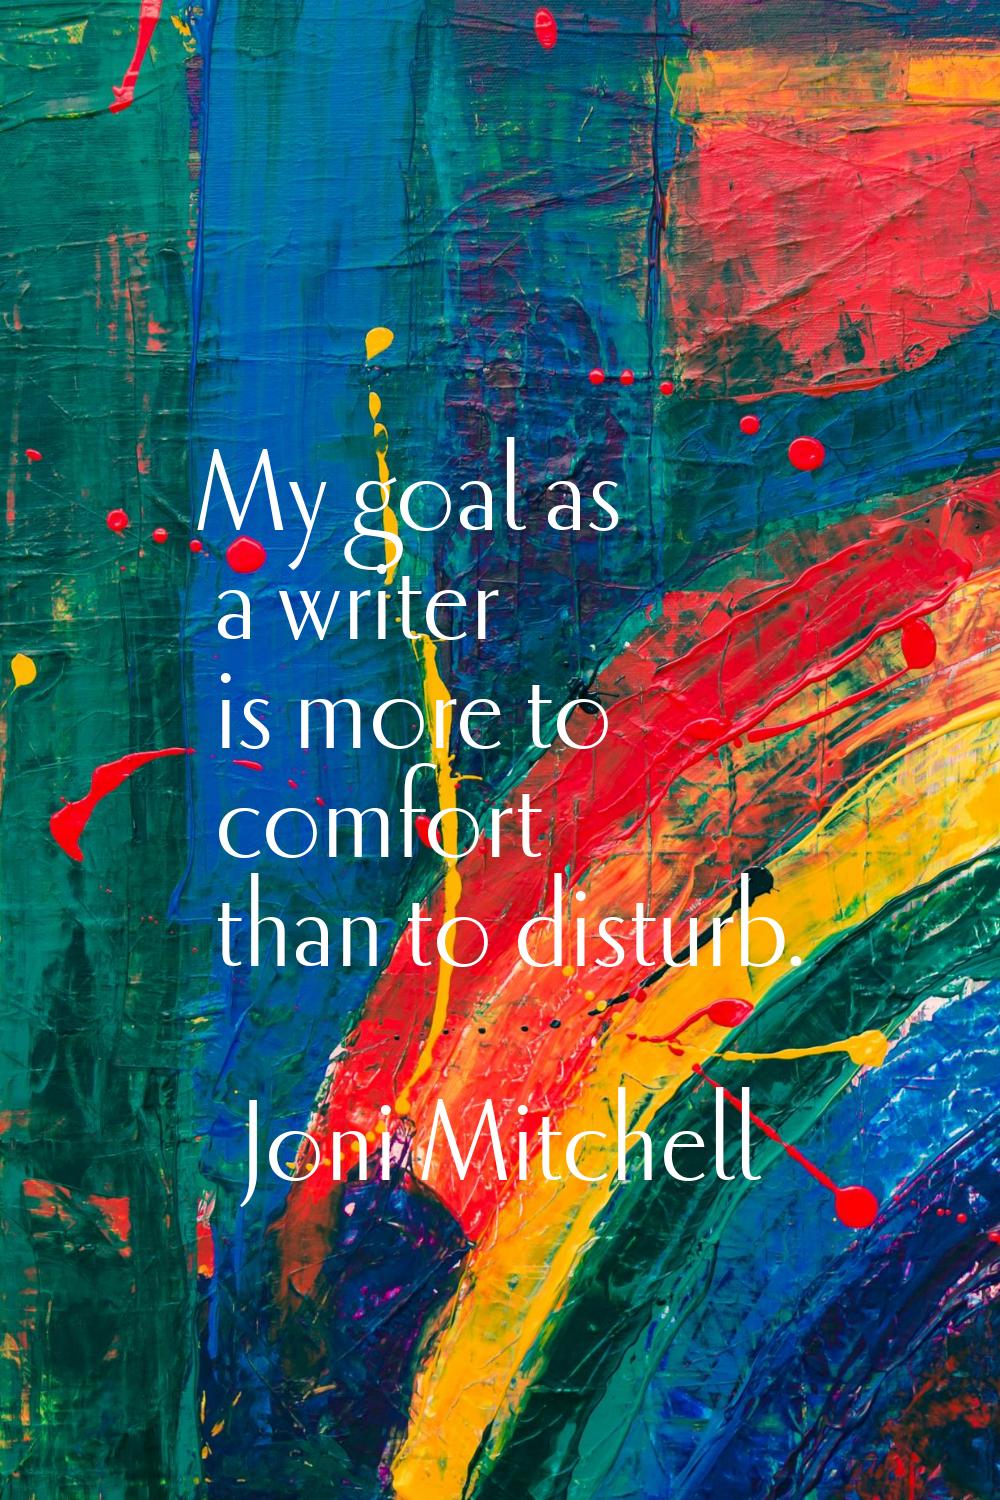 My goal as a writer is more to comfort than to disturb.